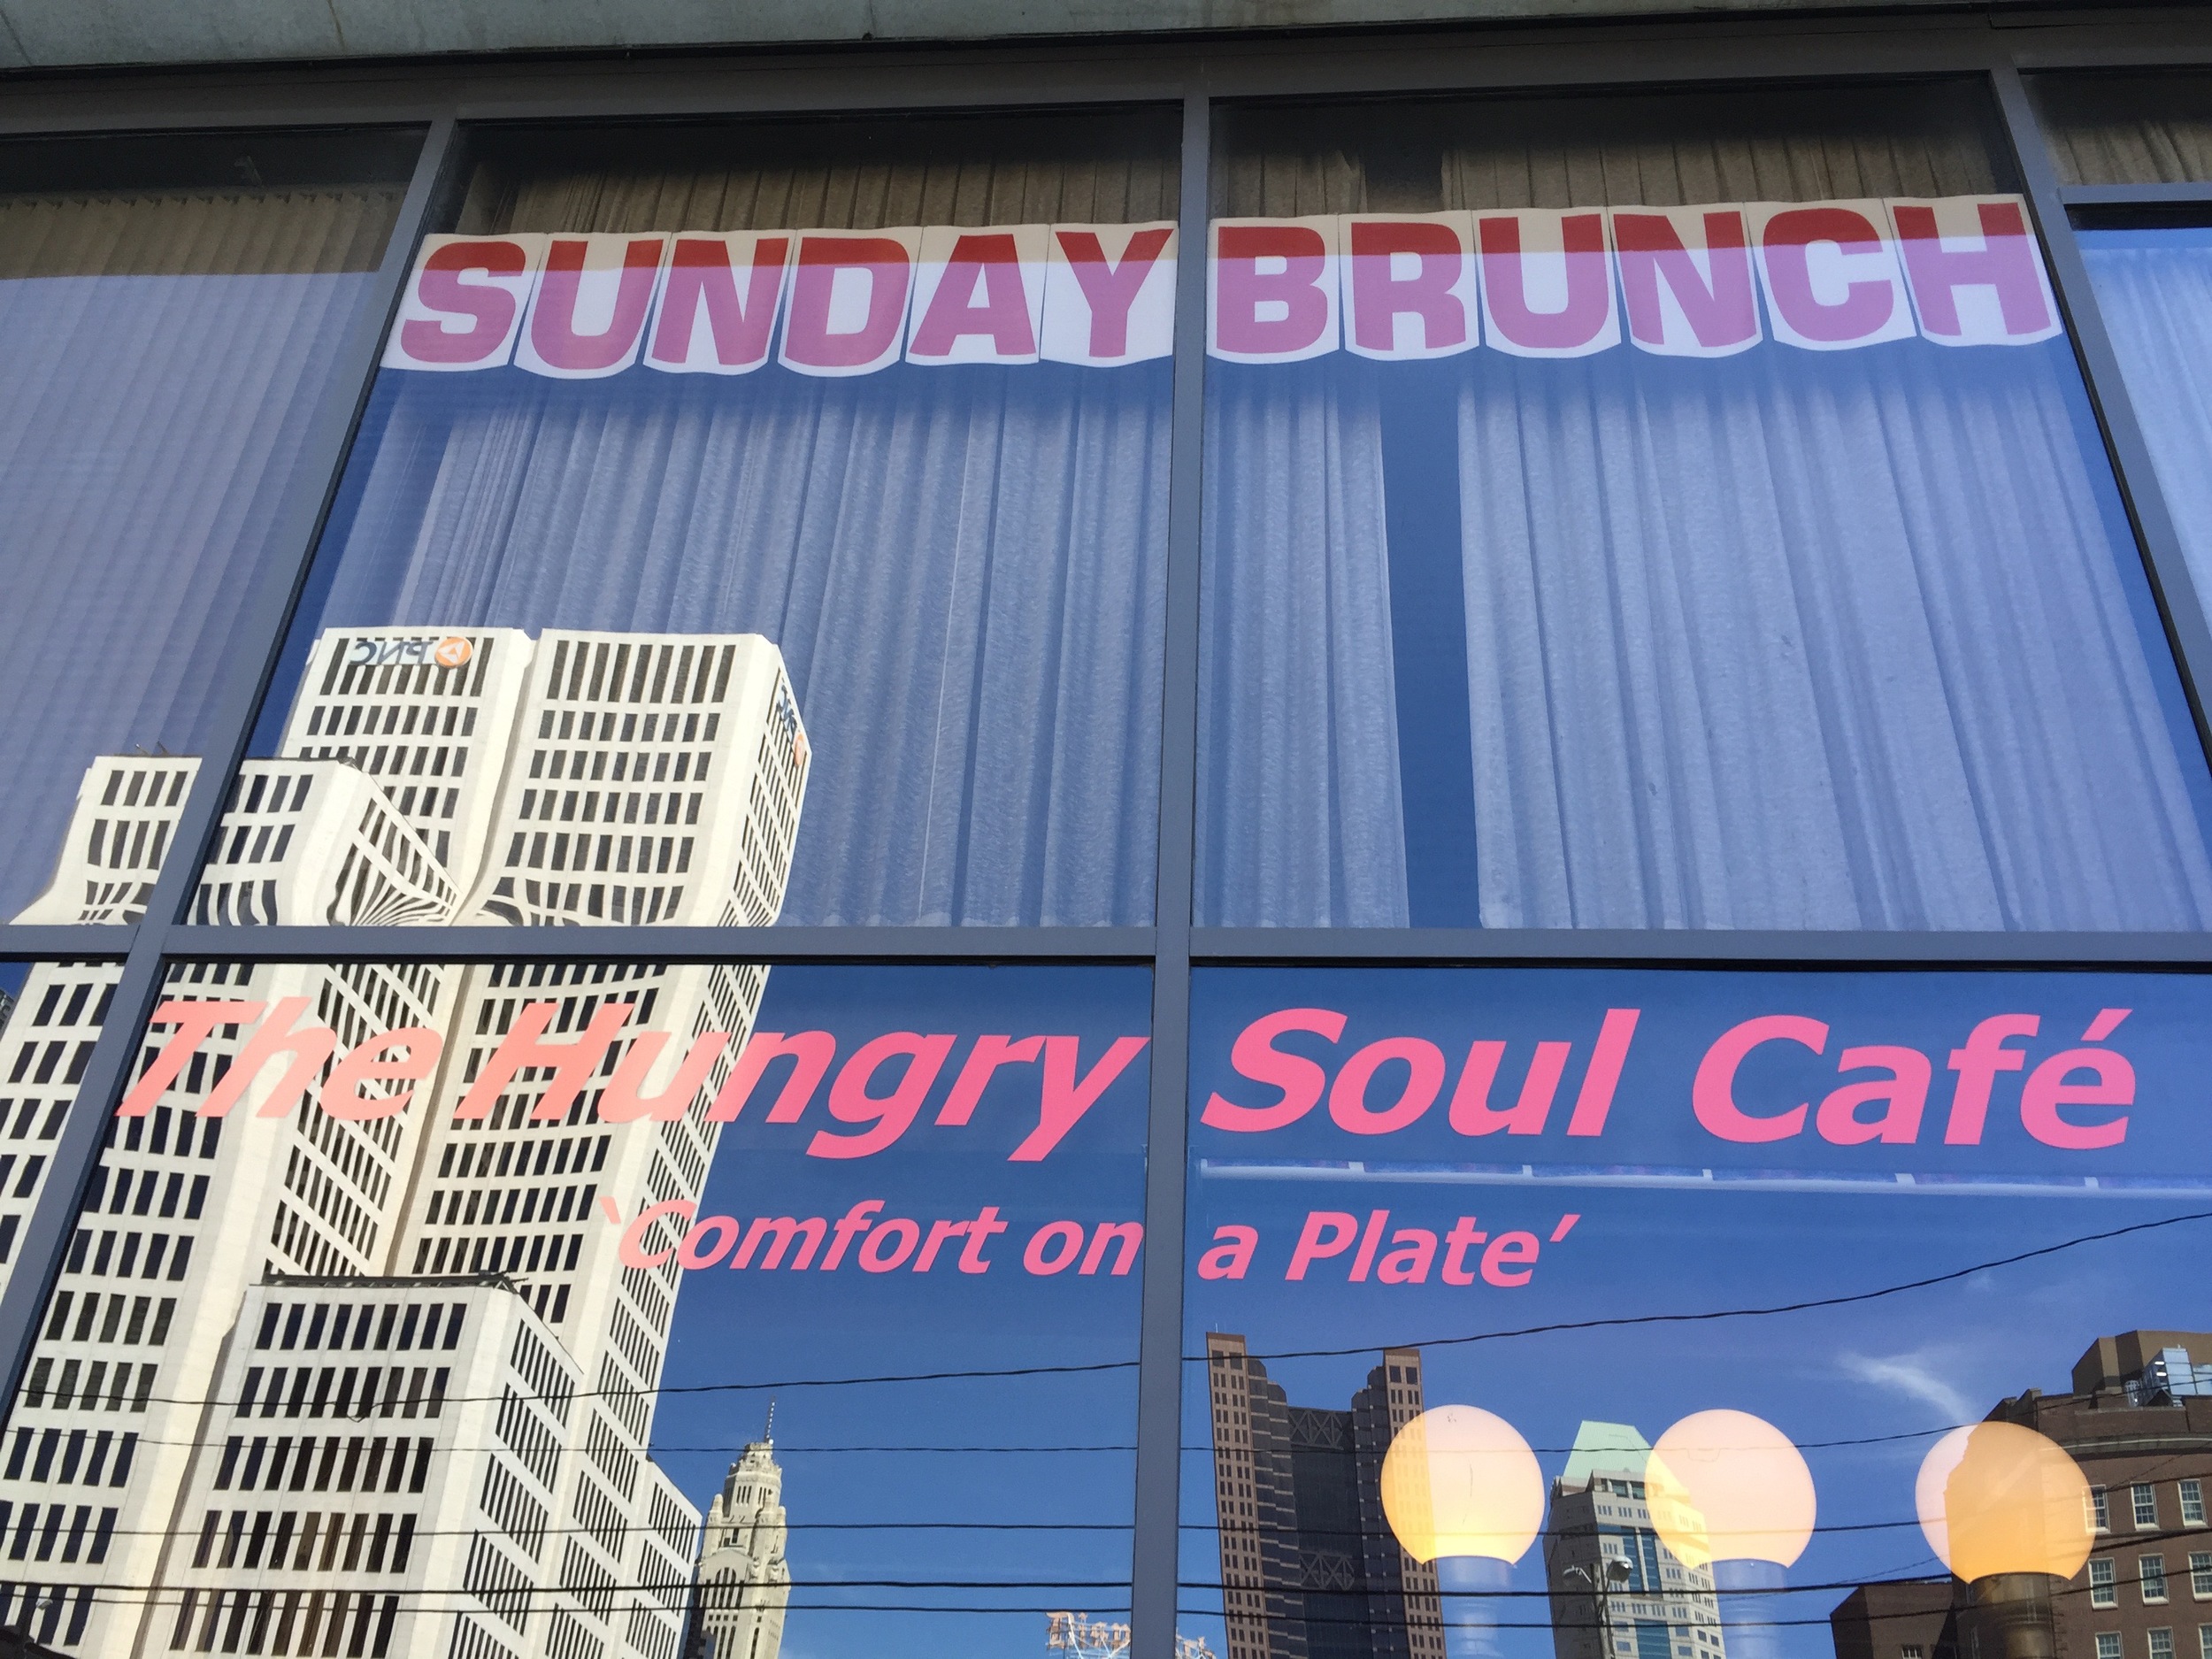 The Hungry Soul Cafe: Great for Sunday brunch!